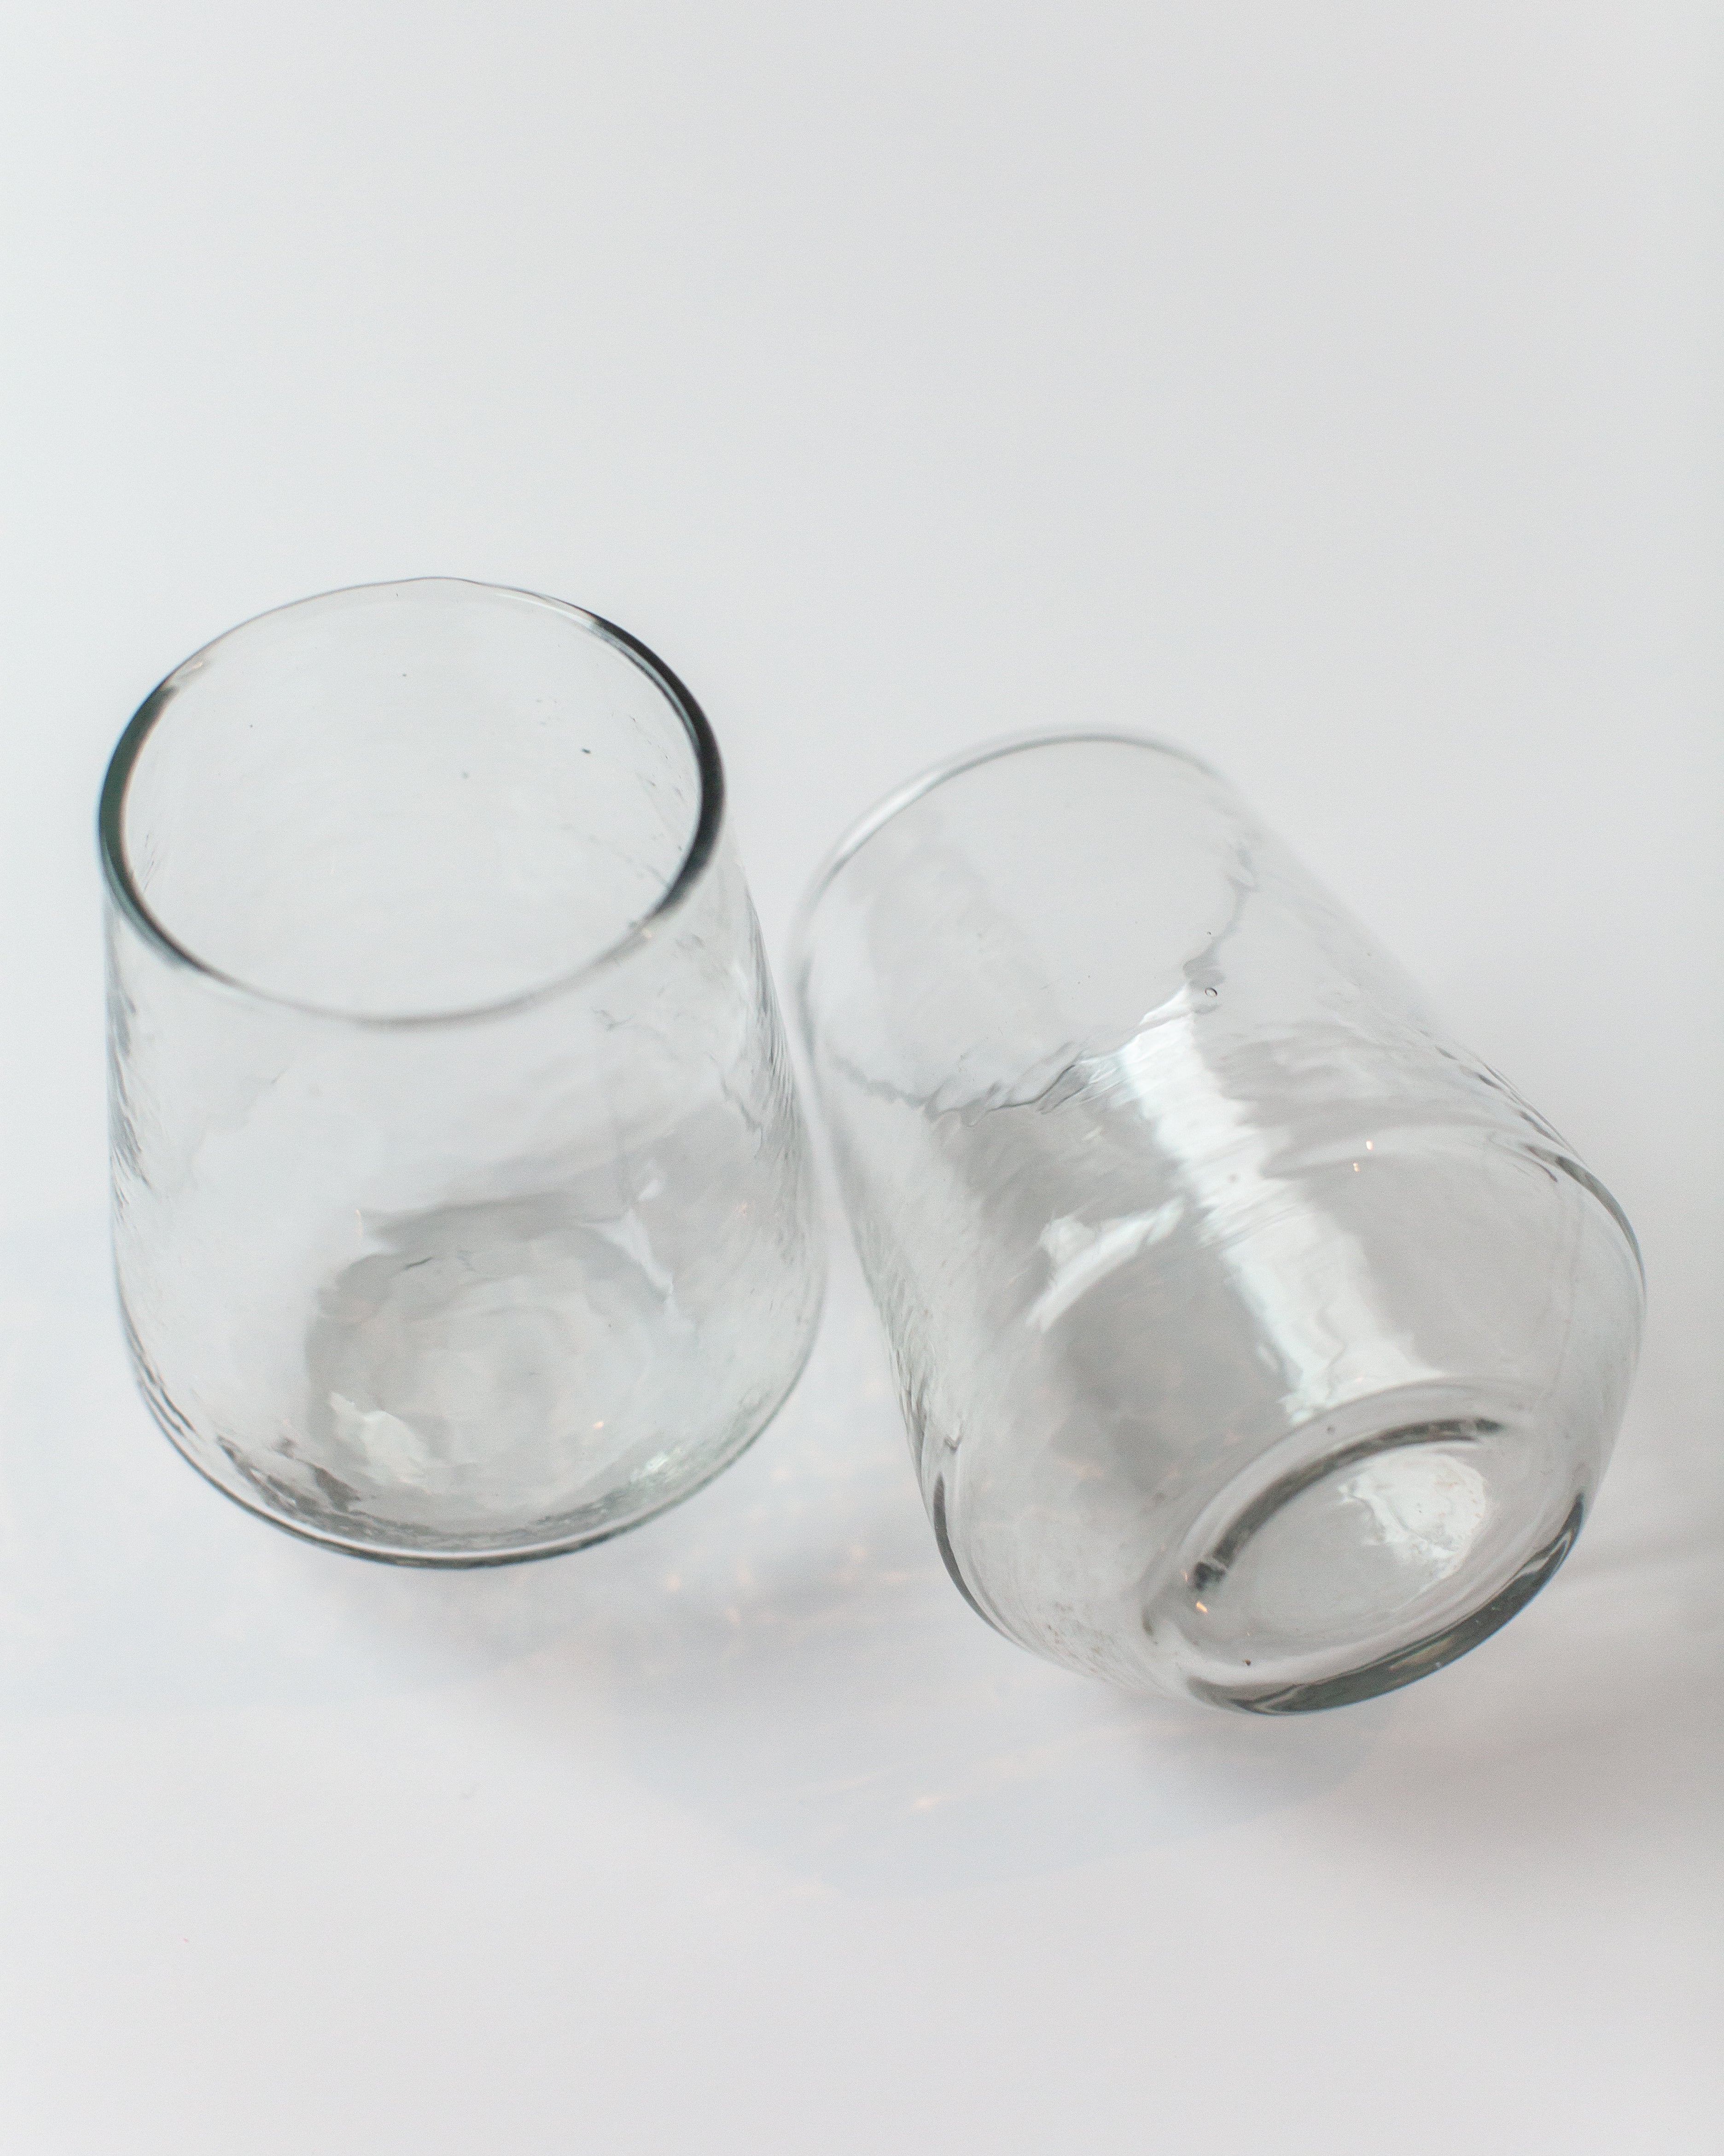 Pair of Hammered Glass Water Tumblers